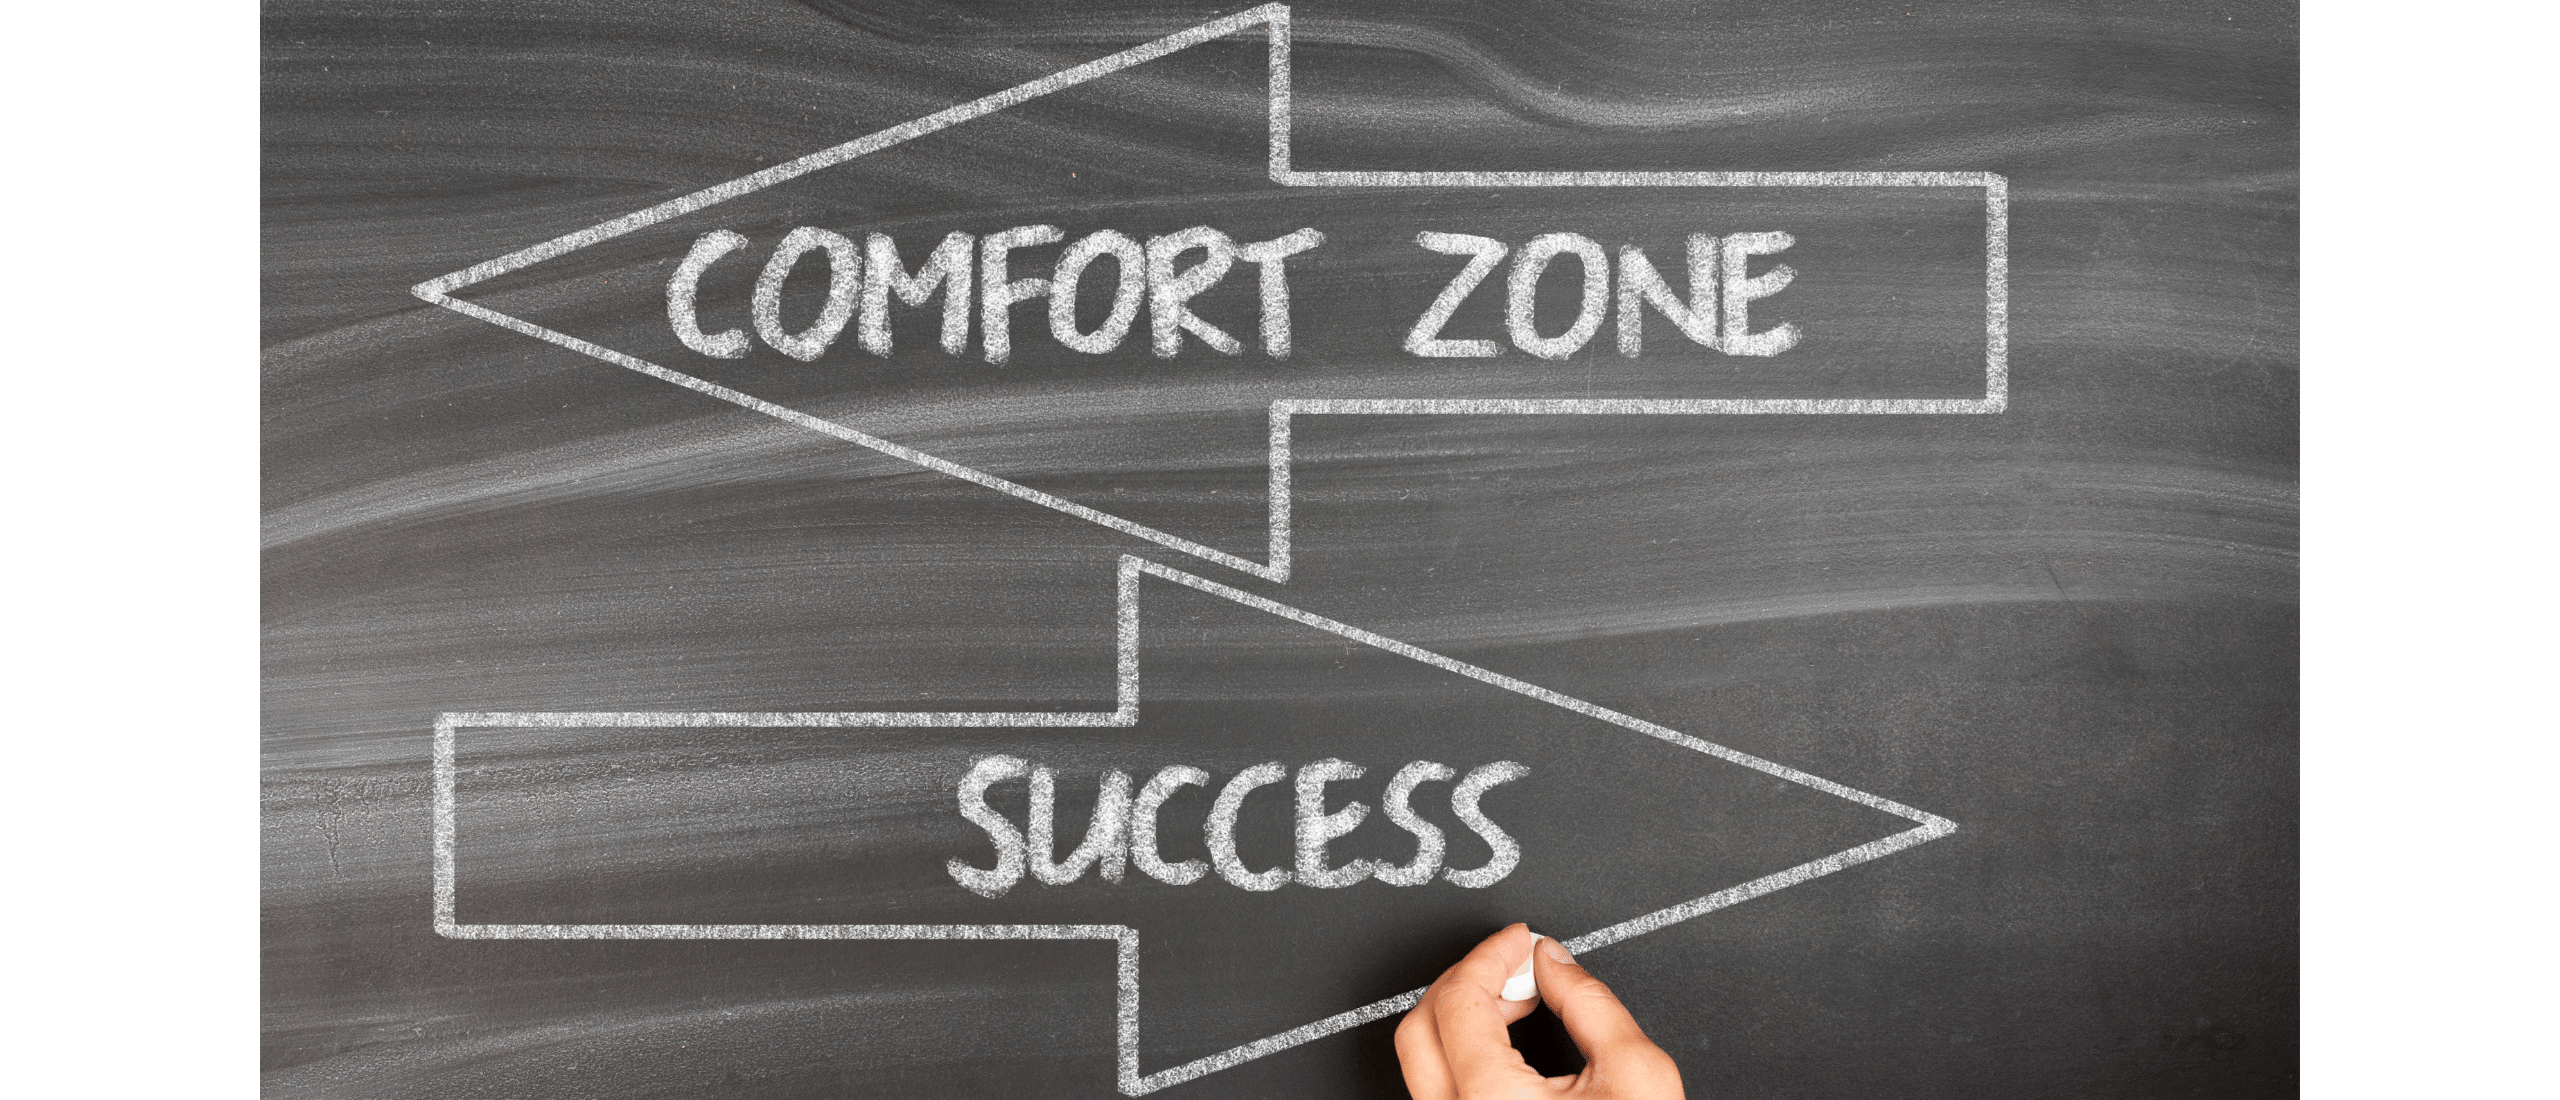 Acceptance Helps Ambitious Entrepreneurs Step Out of Their ‘Comfort Zone’